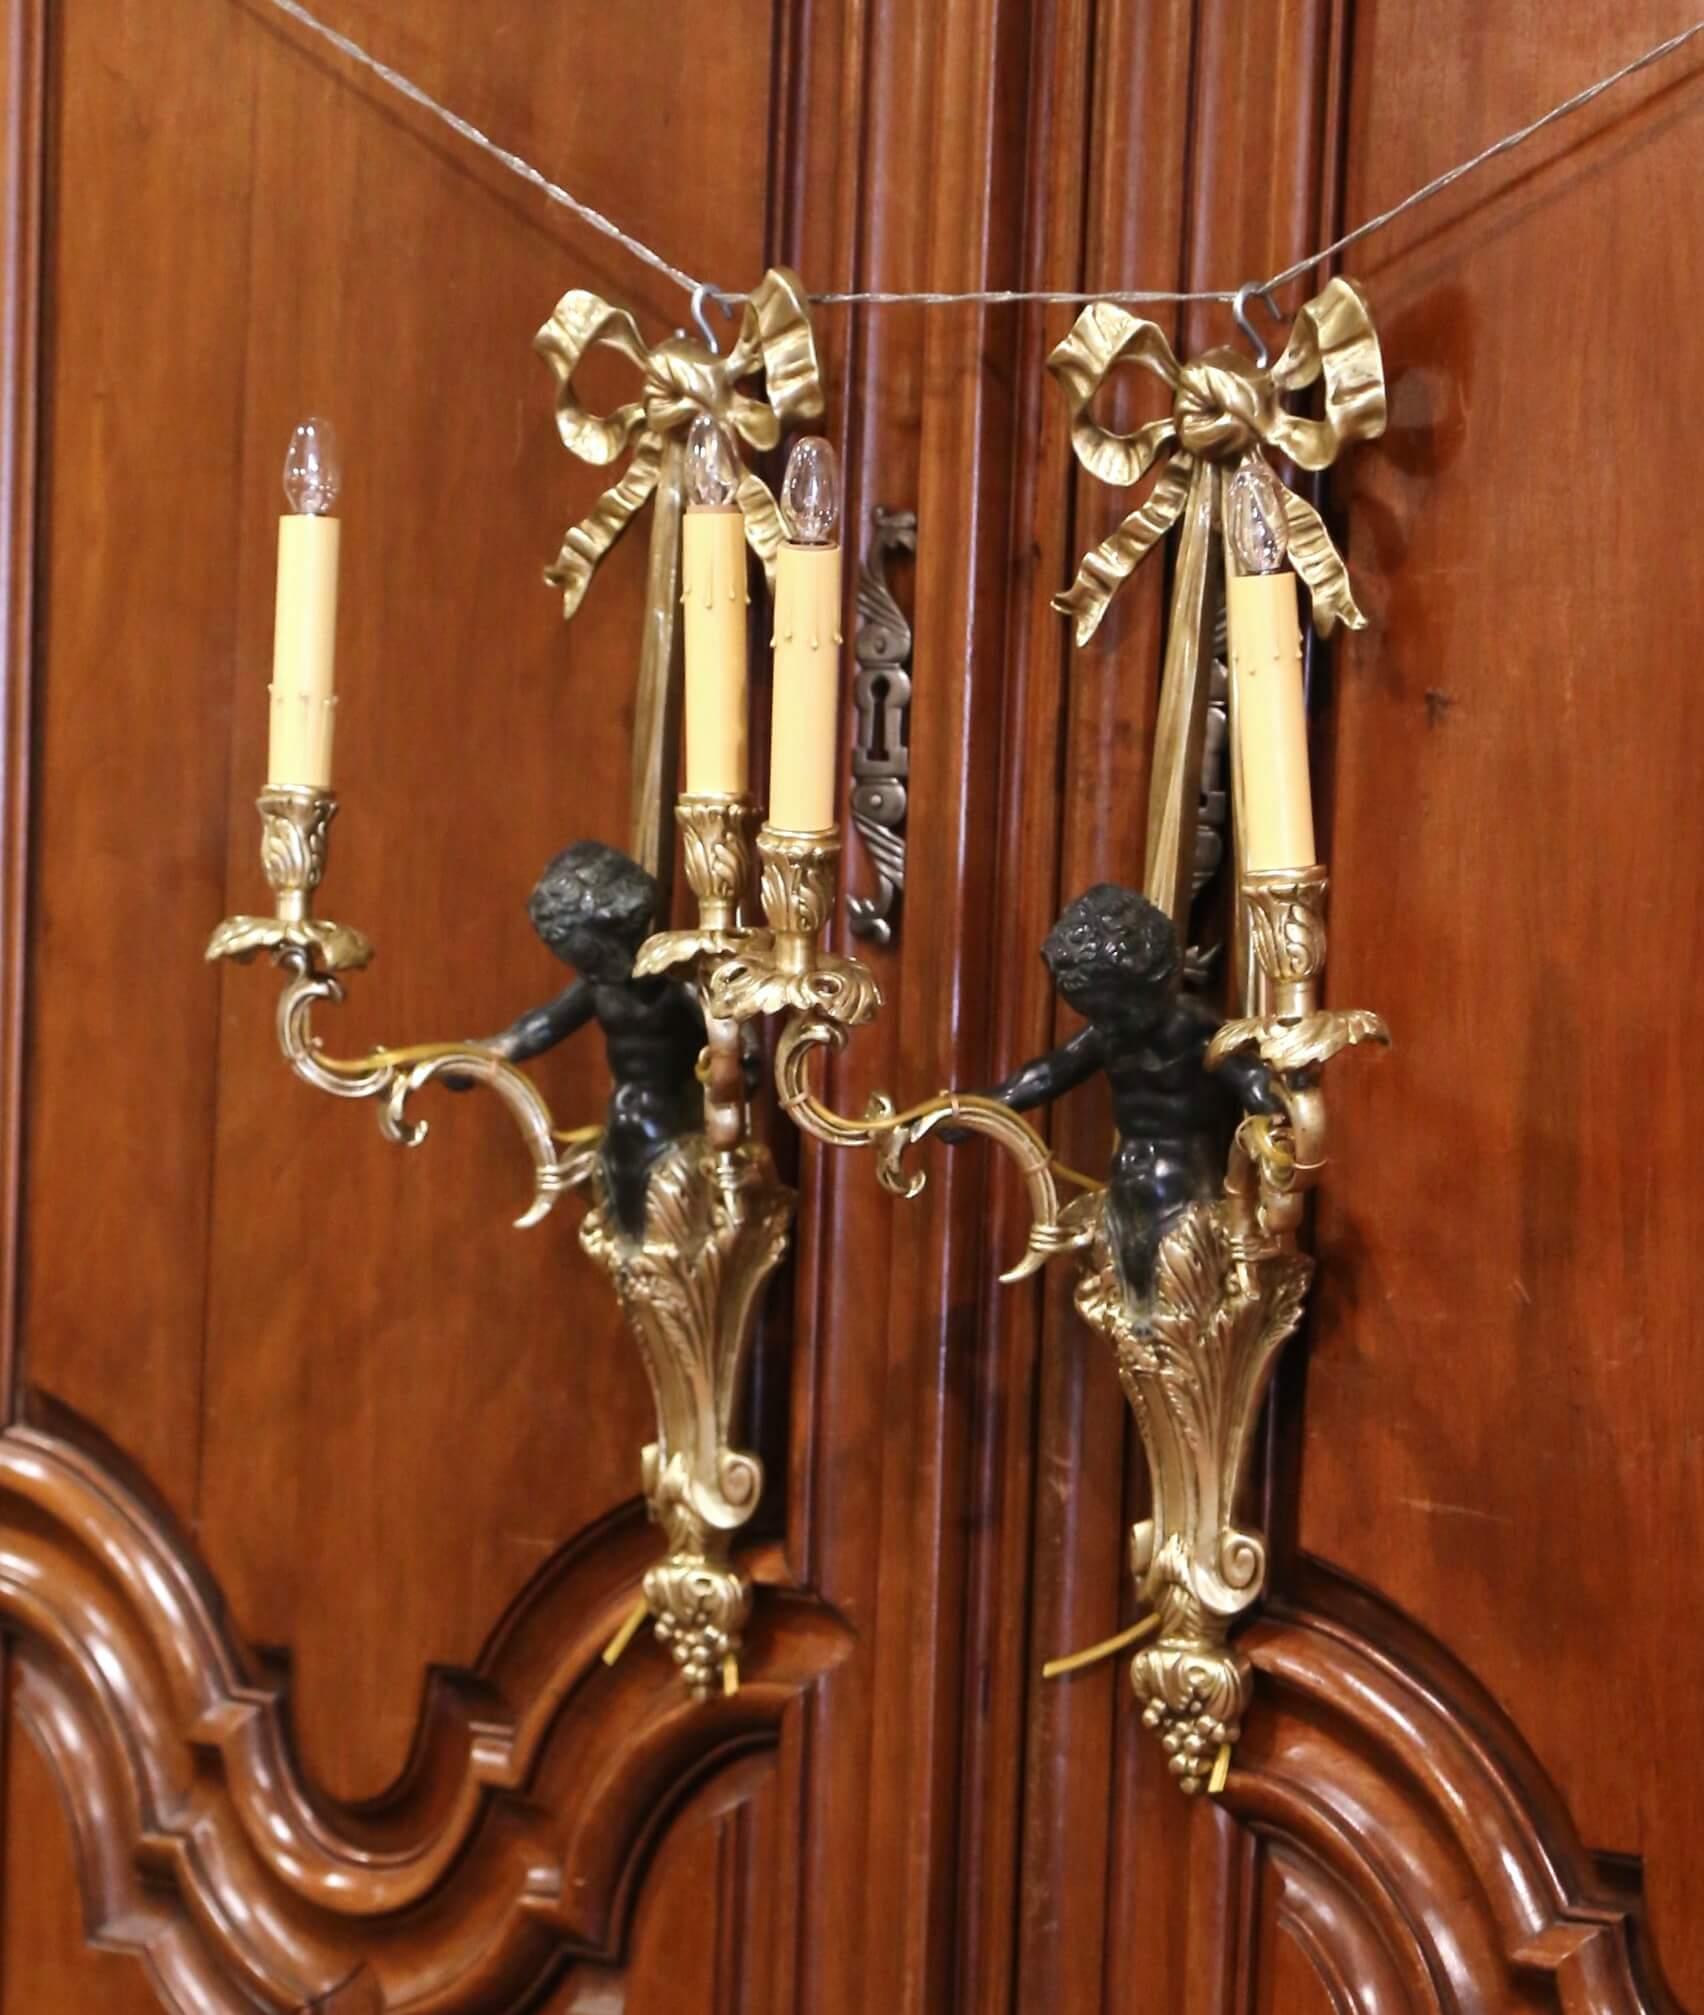 These elegant antique bronze fixtures were crafted in France, circa 1860. Each tall wall sconce features the traditional Louis XVI ribbon bow at the pediment over a patinated cherub figure draped in acanthus leaves and holding the two arms; it has